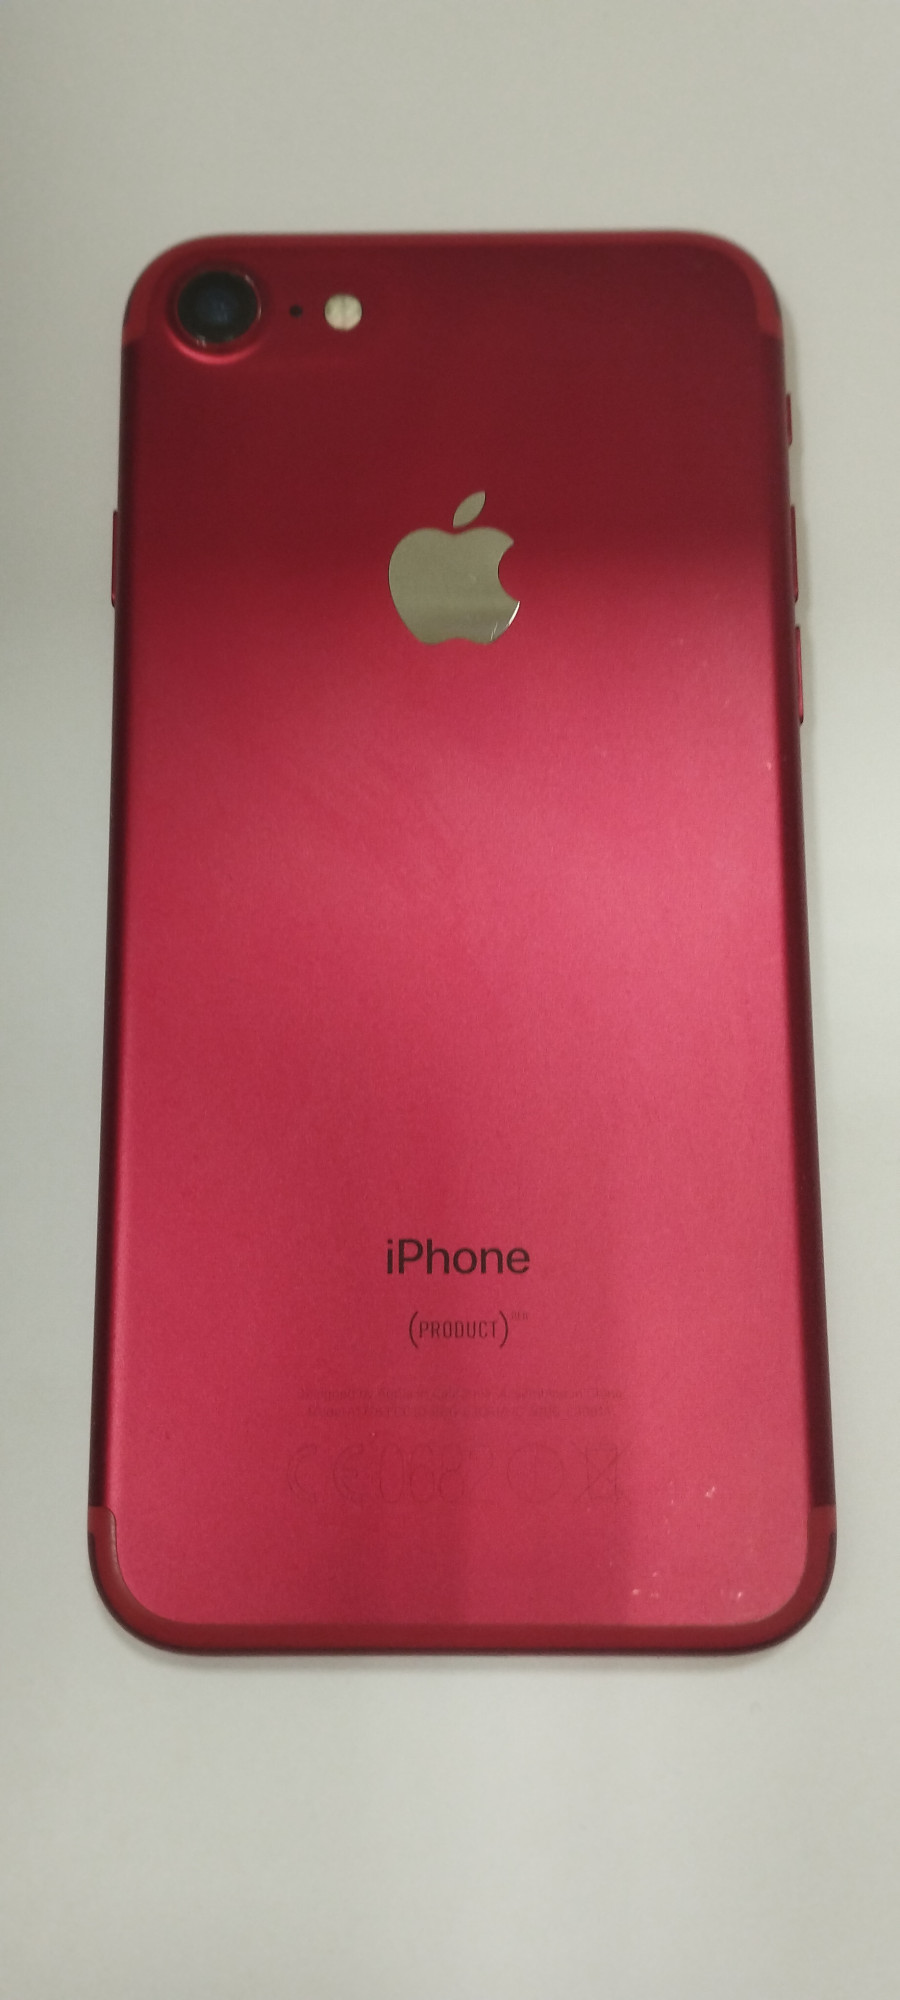 Apple iPhone 7 128Gb (Product) Red (MPRL2) 3